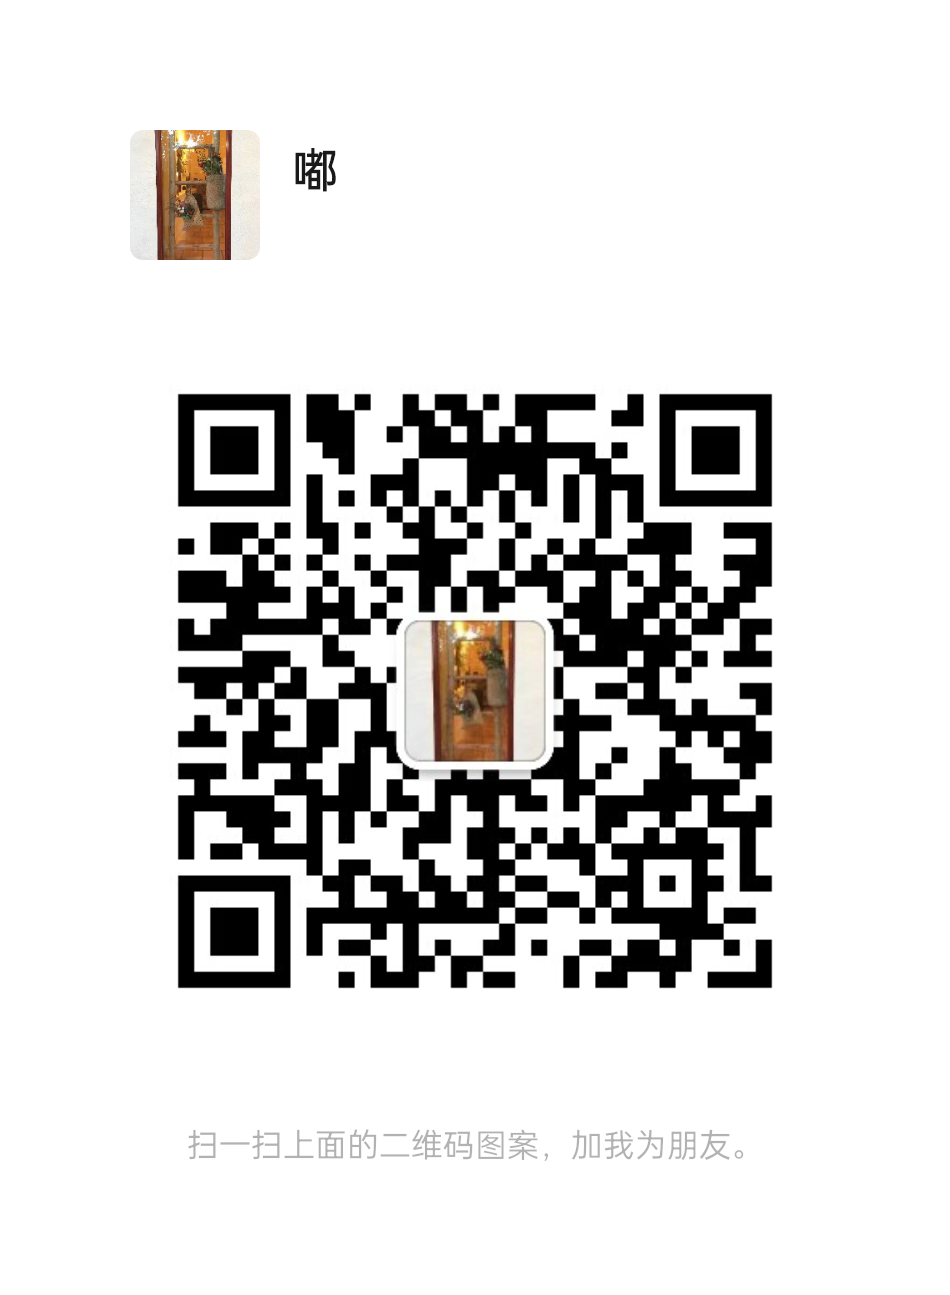 mmqrcode1688598232039.png